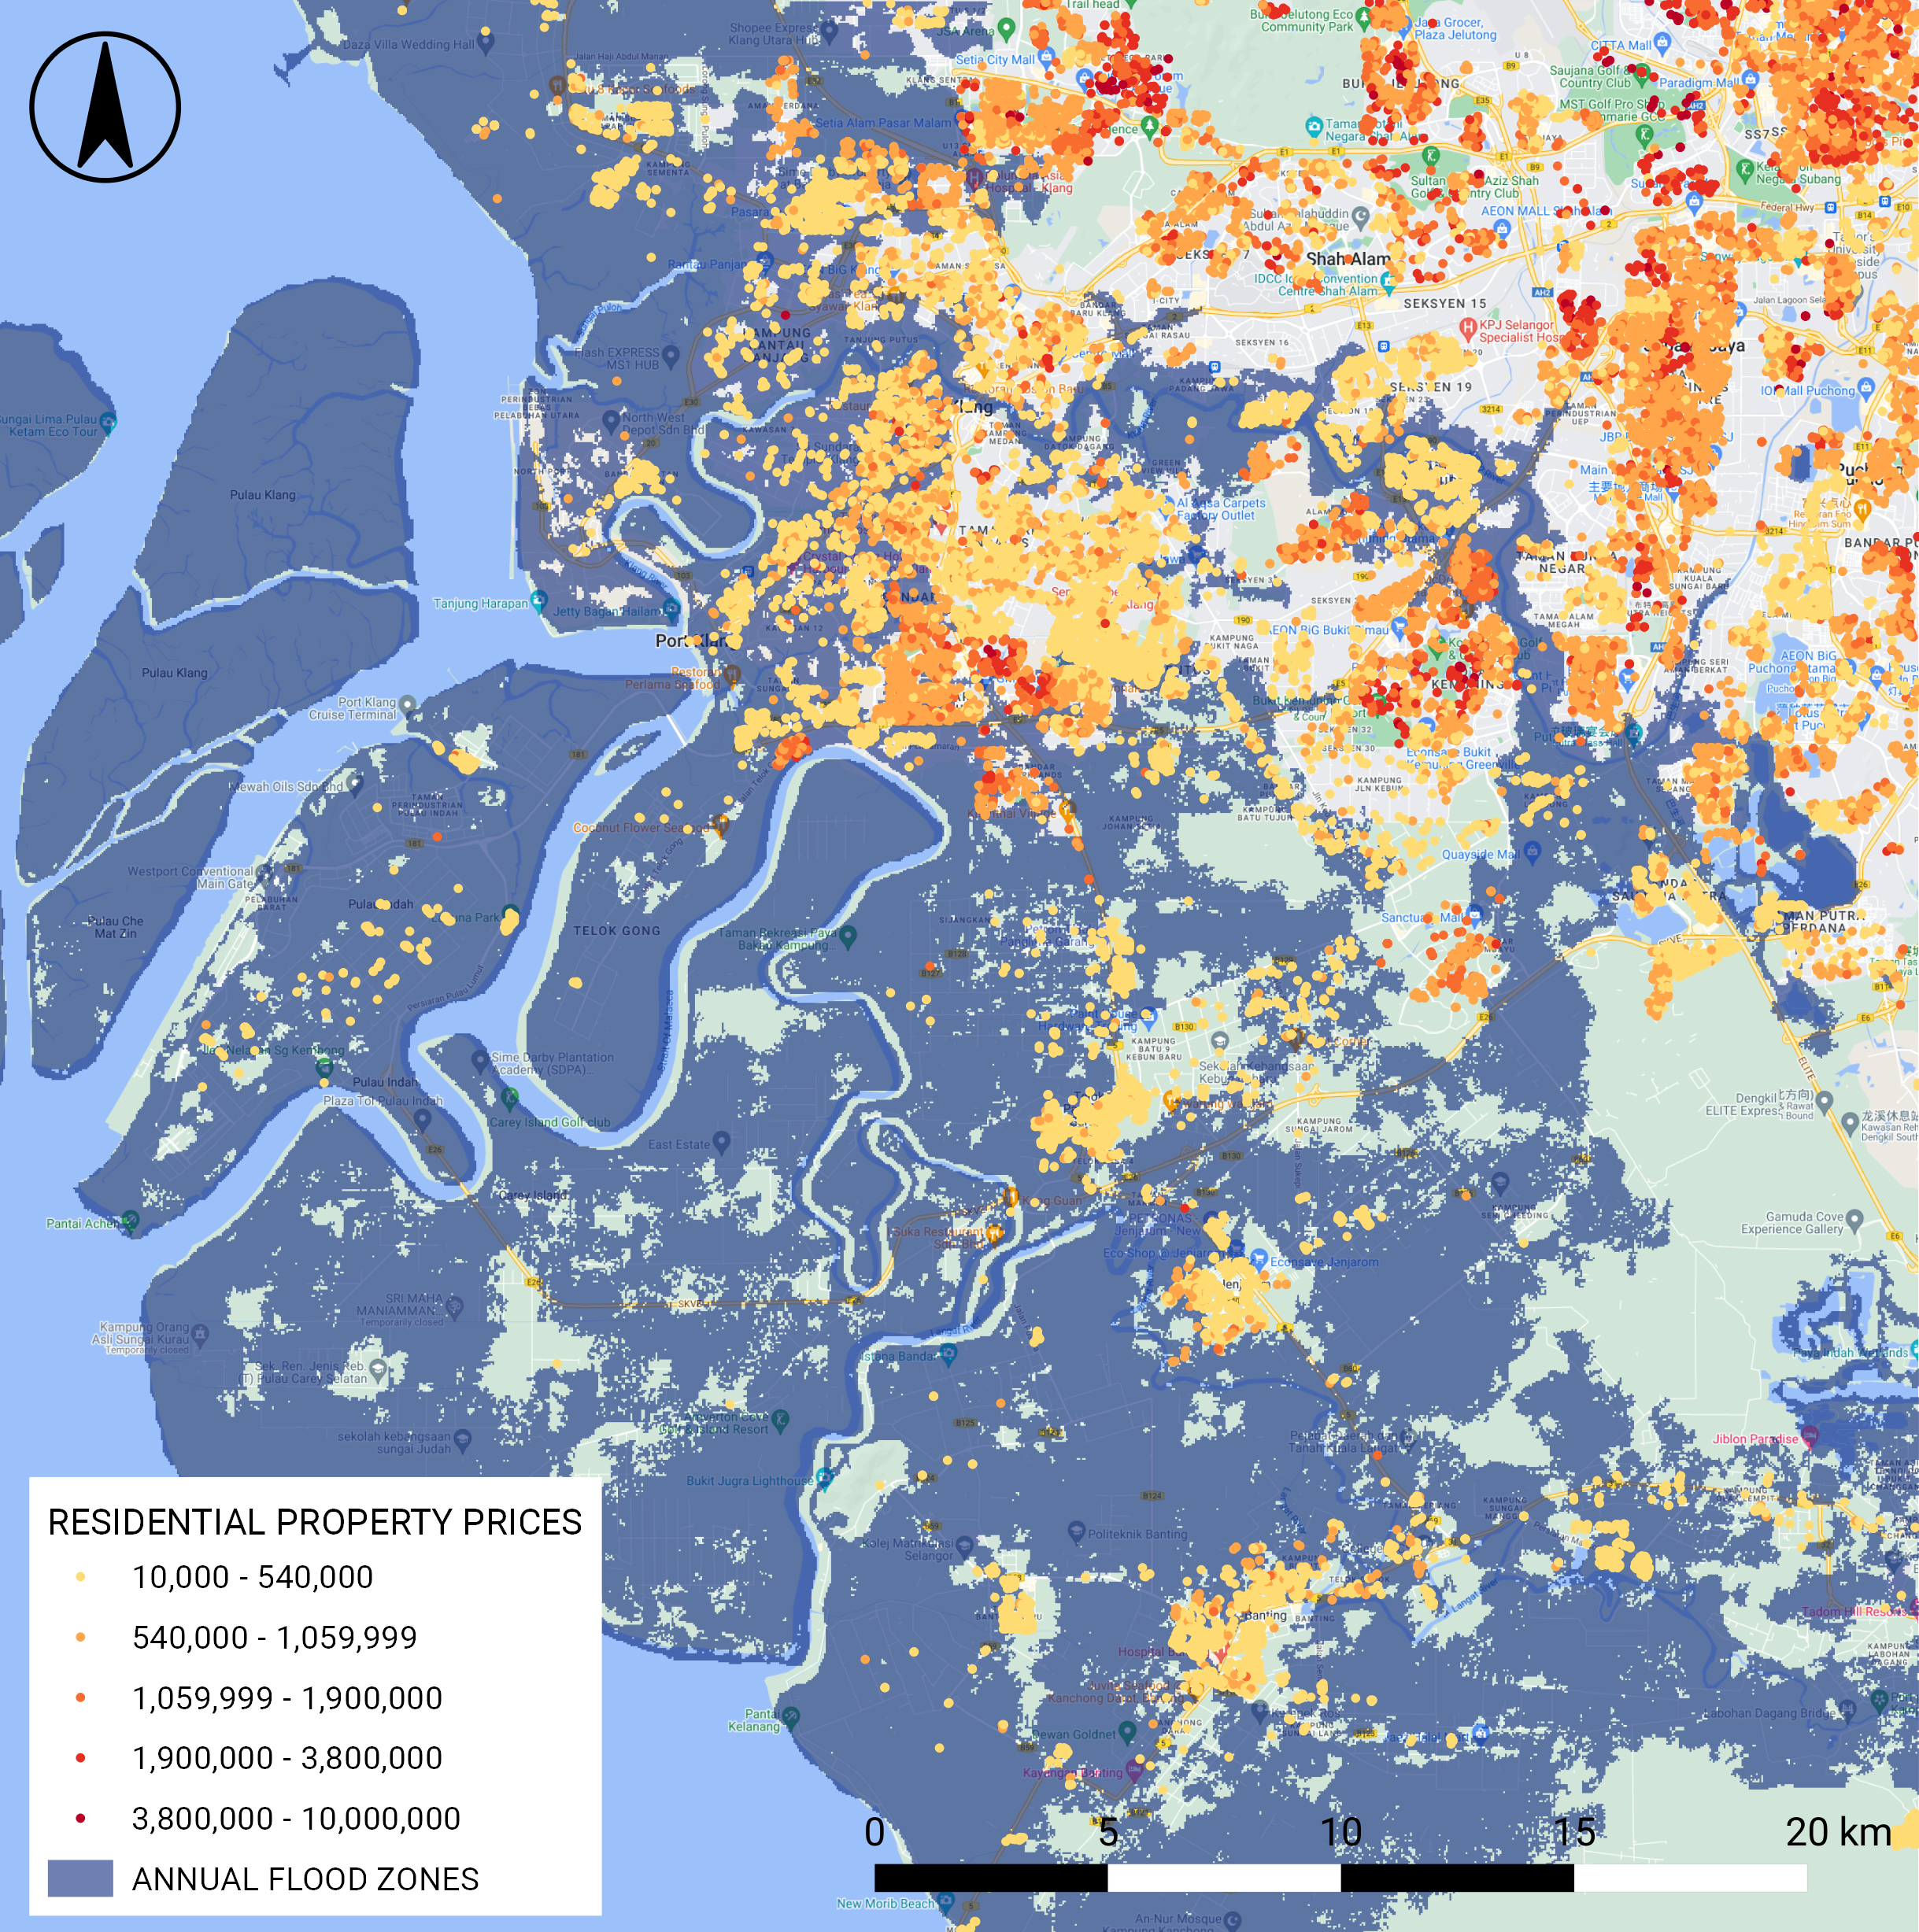 A map of a shoreline representing flood zones and housing prices within them